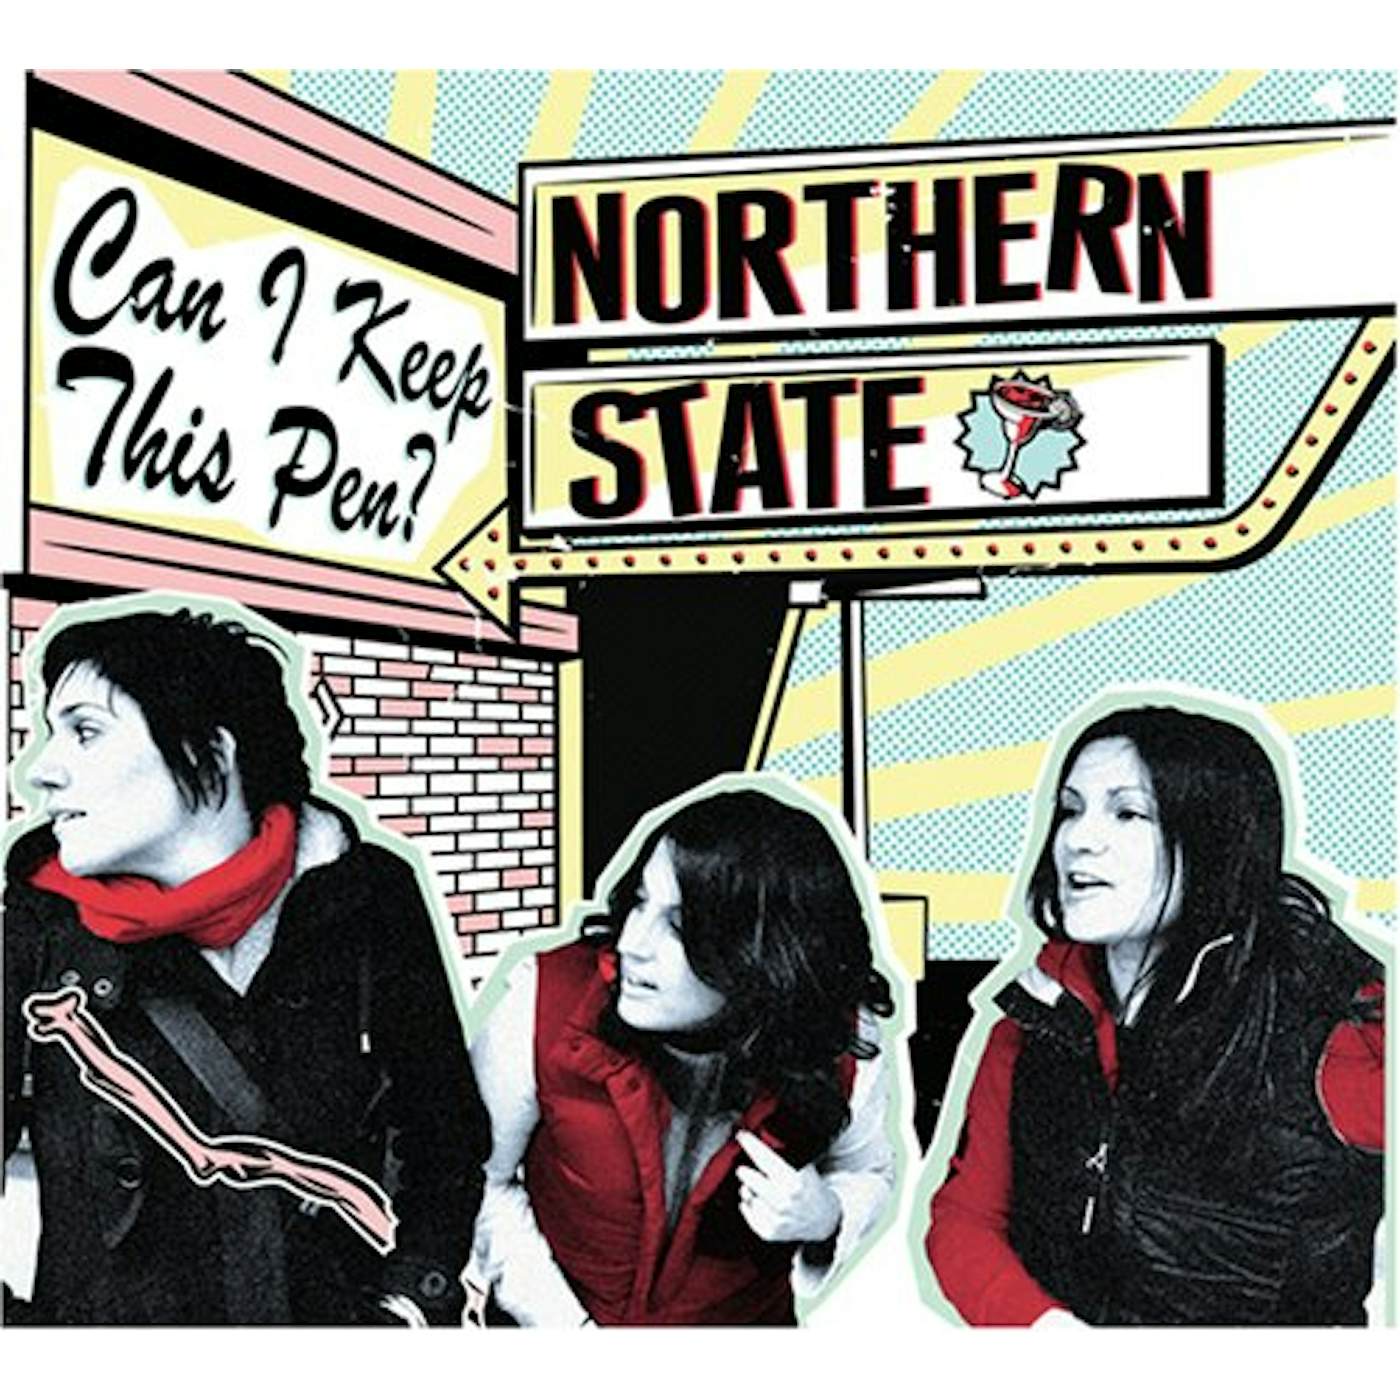 Northern State CAN I KEEP THIS PEN CD